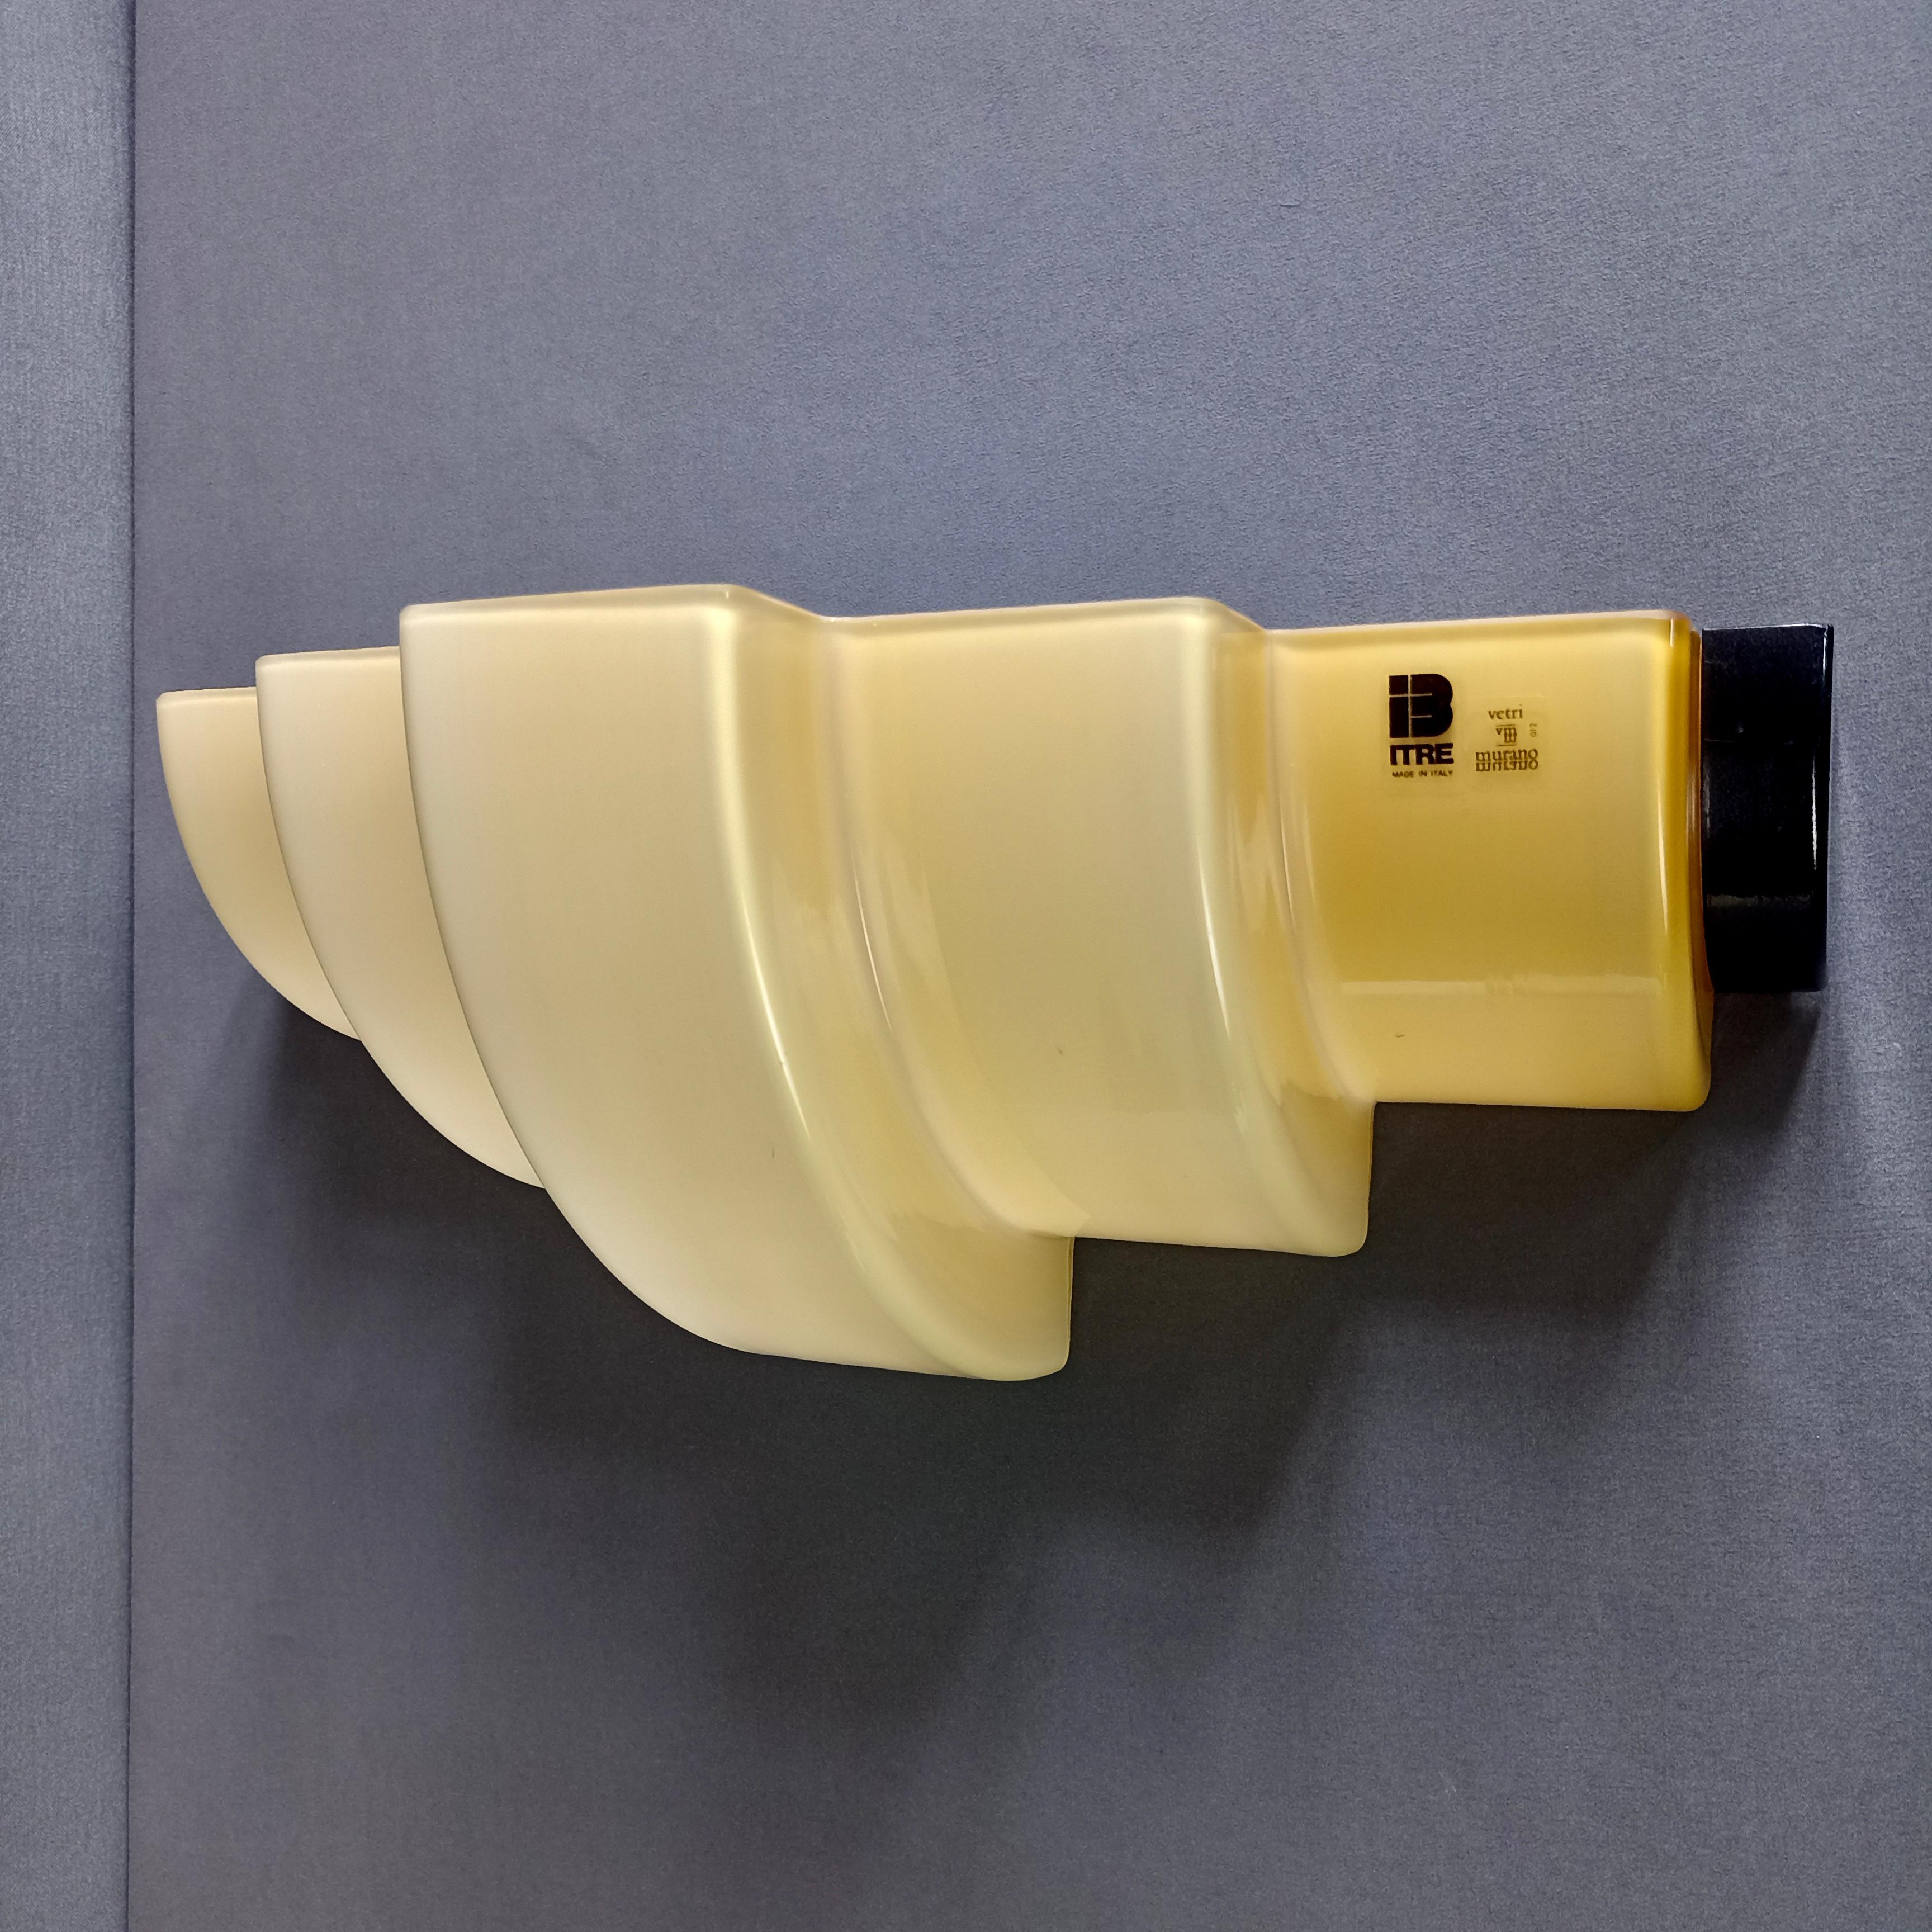 Beautiful Murano ITre-marked 1990s two-light single wall lamp in cased white and warm yellow glass. 
The shape of the glass lampshade has been modeled in a very special way, creating three different levels from the center towards the edges, harking